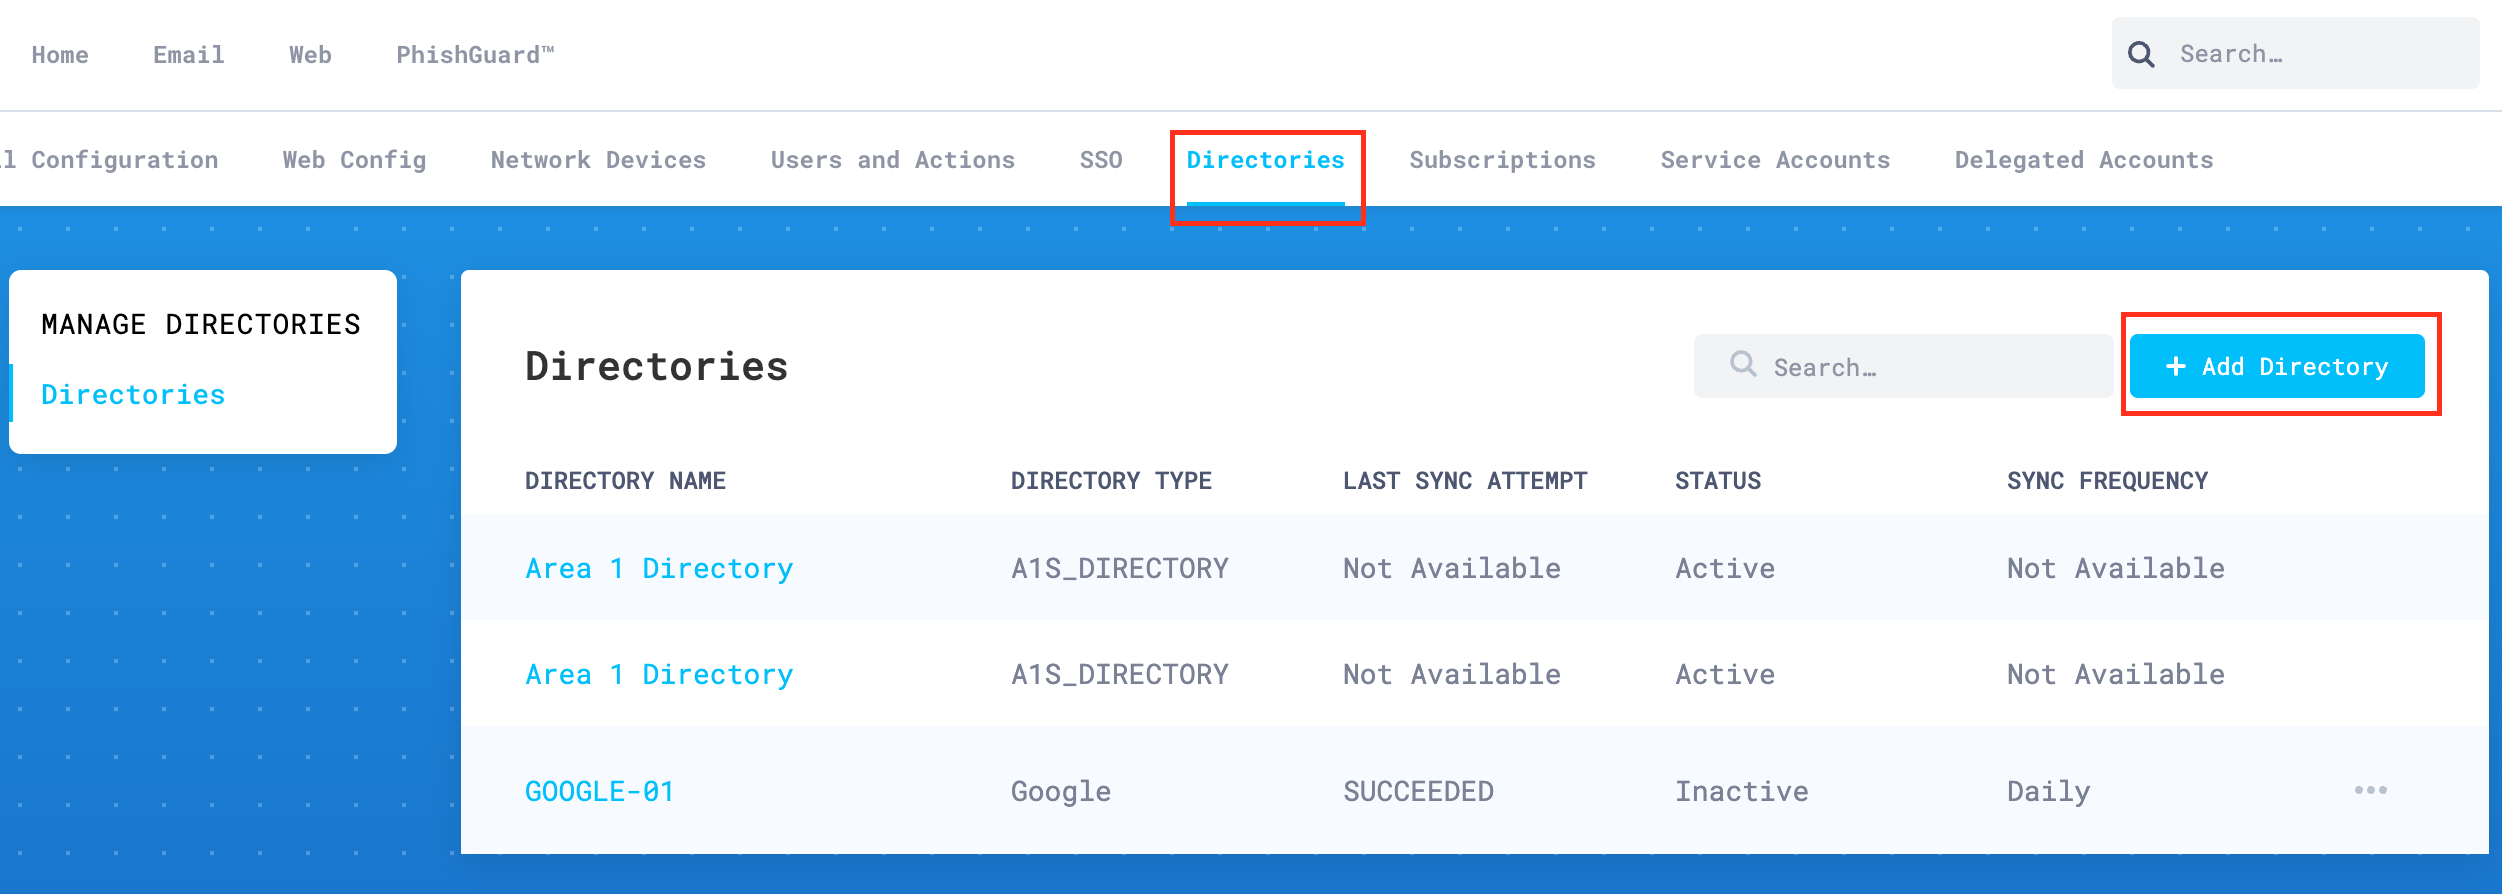 Go to Directories in the dashboard of Cloud Email Security, and then select Add Directory to start the authorization process